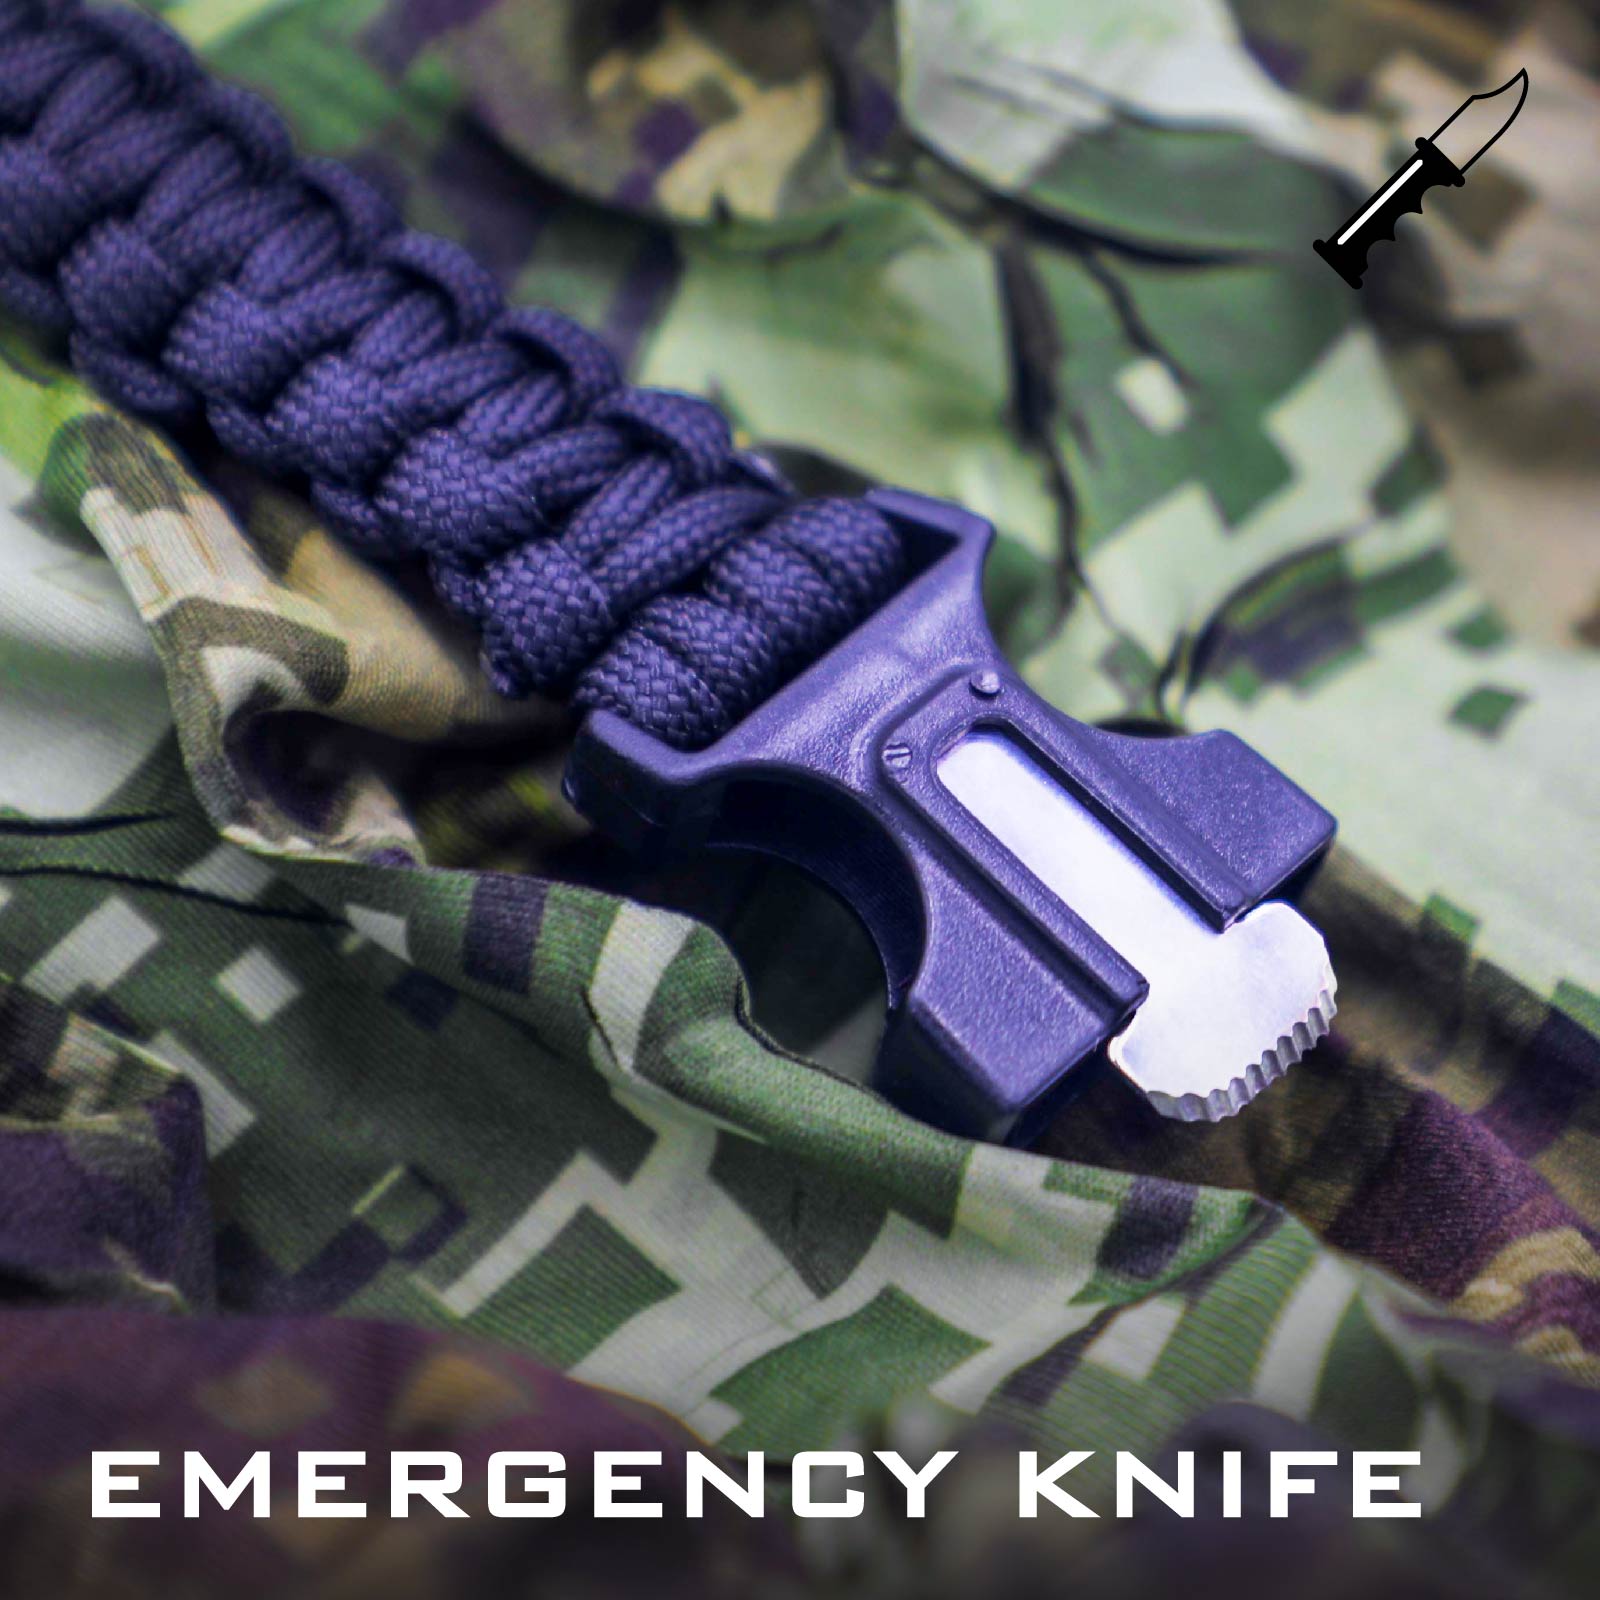 ELK Paracord Survival Bracelets Include Adjustable Size, Loud Whistle and  Fire Starter - Perfect for Outdoor Hiking, Camping, Fishing and Hunting